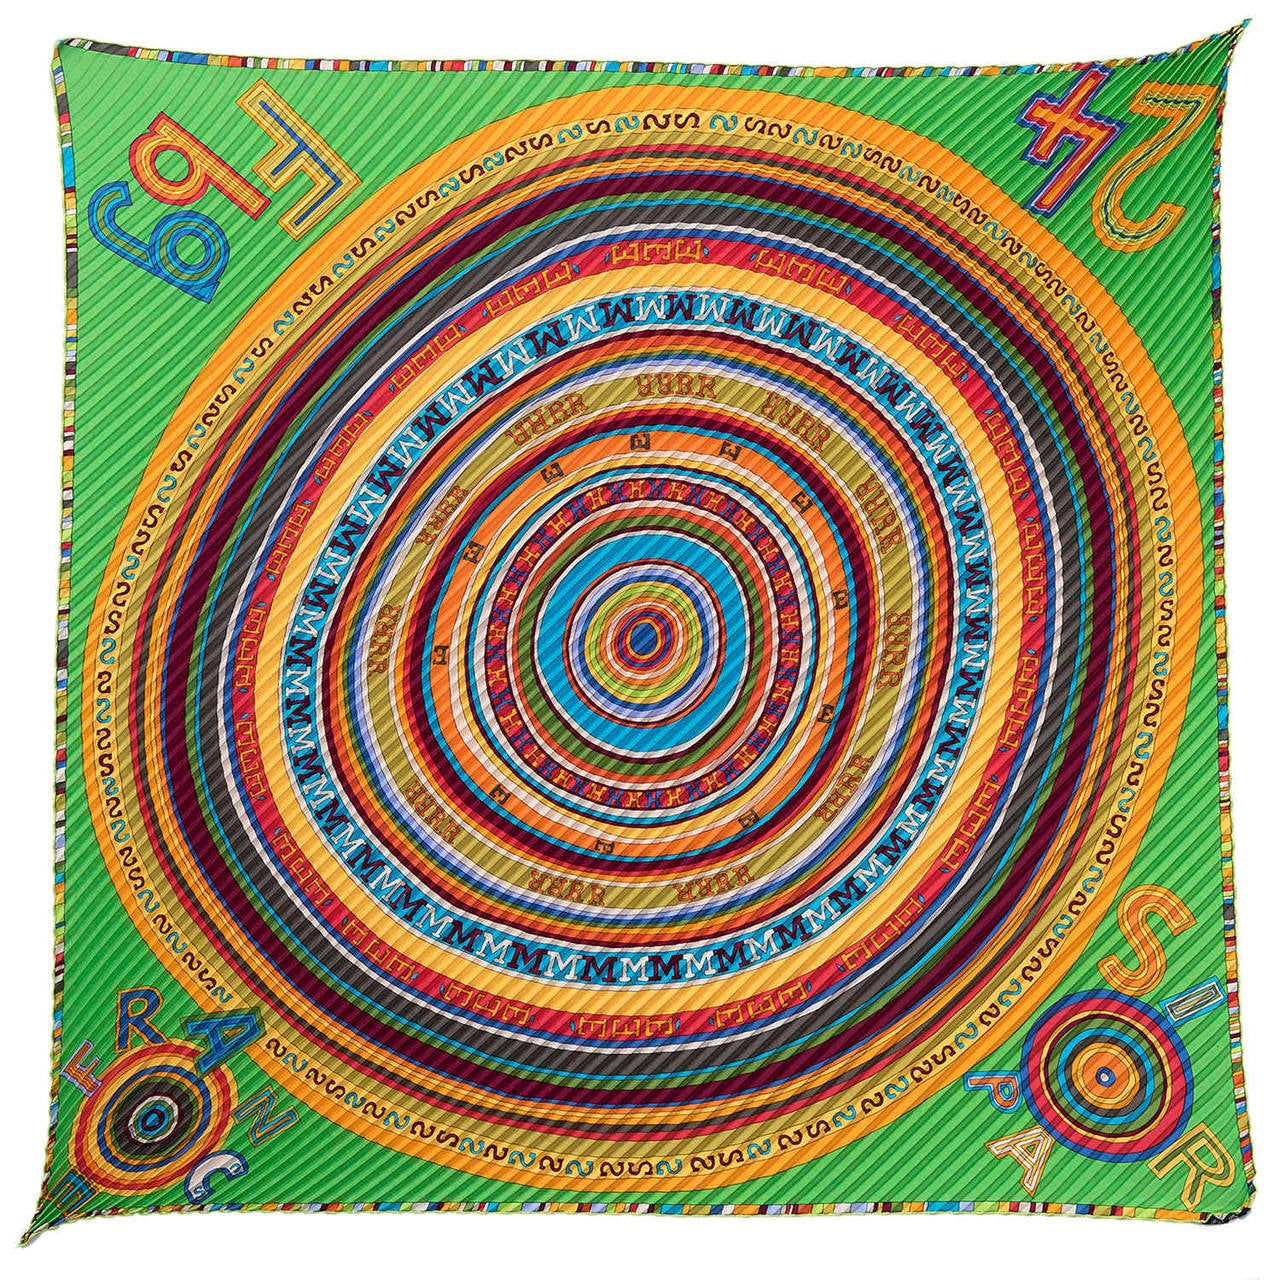 This important Hermes Silk, pleated - 'plisse' scarf was introduced by Hermes in 2012, to celebrate their 175th anniversary. Founded by Thierry Hermes in 1837, Hermes Headquarters, in Paris, France, are at 24 Rue du Faubourg, and this beautiful,